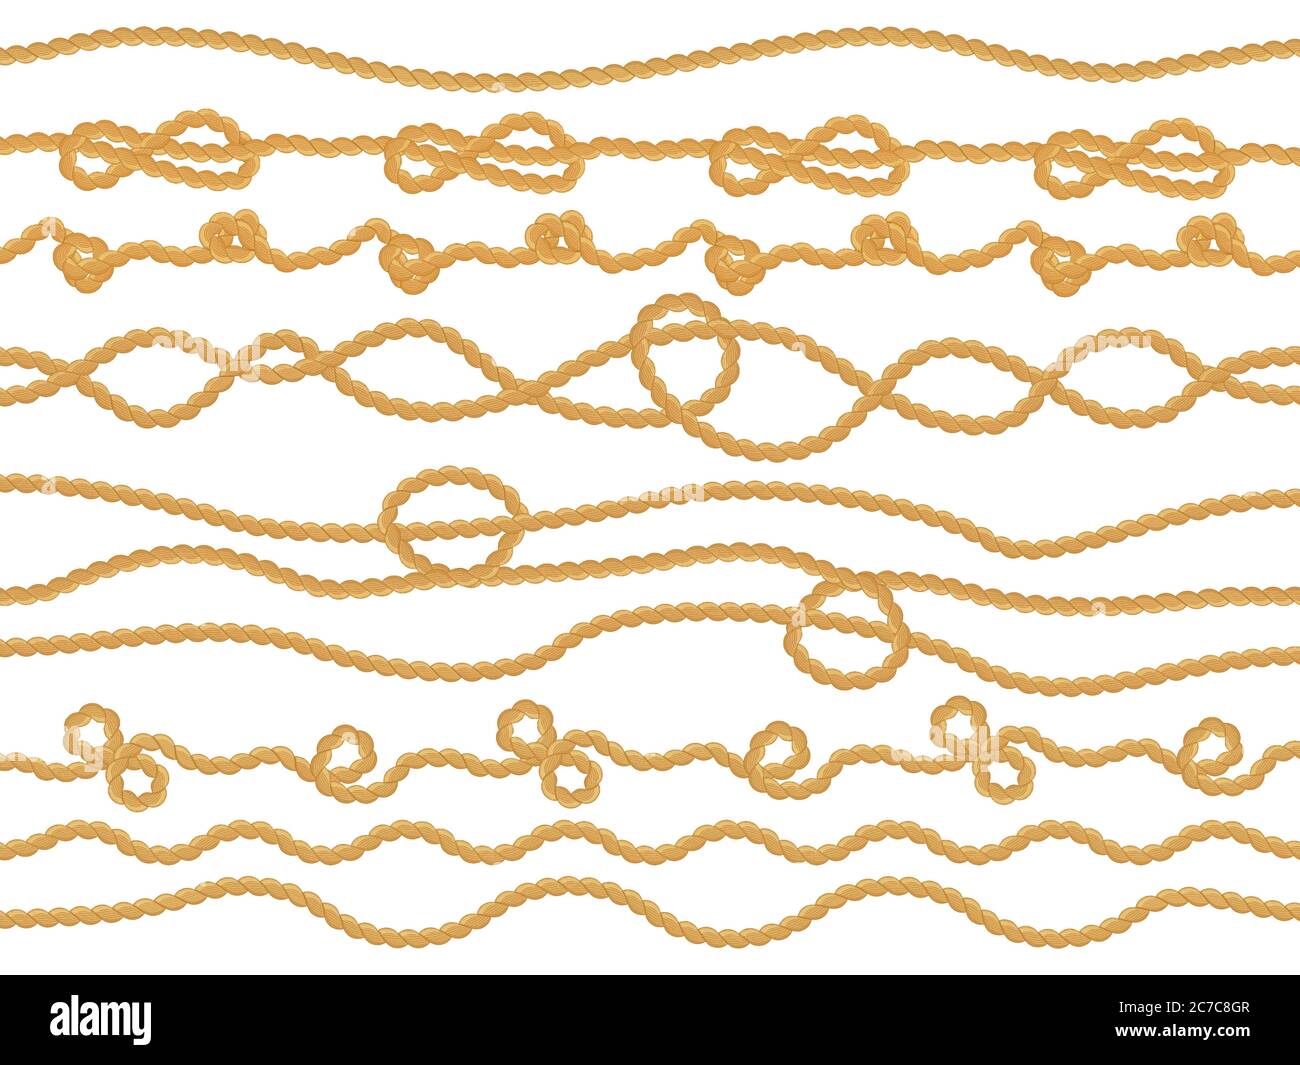 Nautical Rope Round And Square Rope Frames Cord Borders Sailing Vector  Decoration Elements Rope Marine Nautical Border Cord Round String Knot  Twisted Illustration Stock Illustration - Download Image Now - iStock,  Nautical Rope